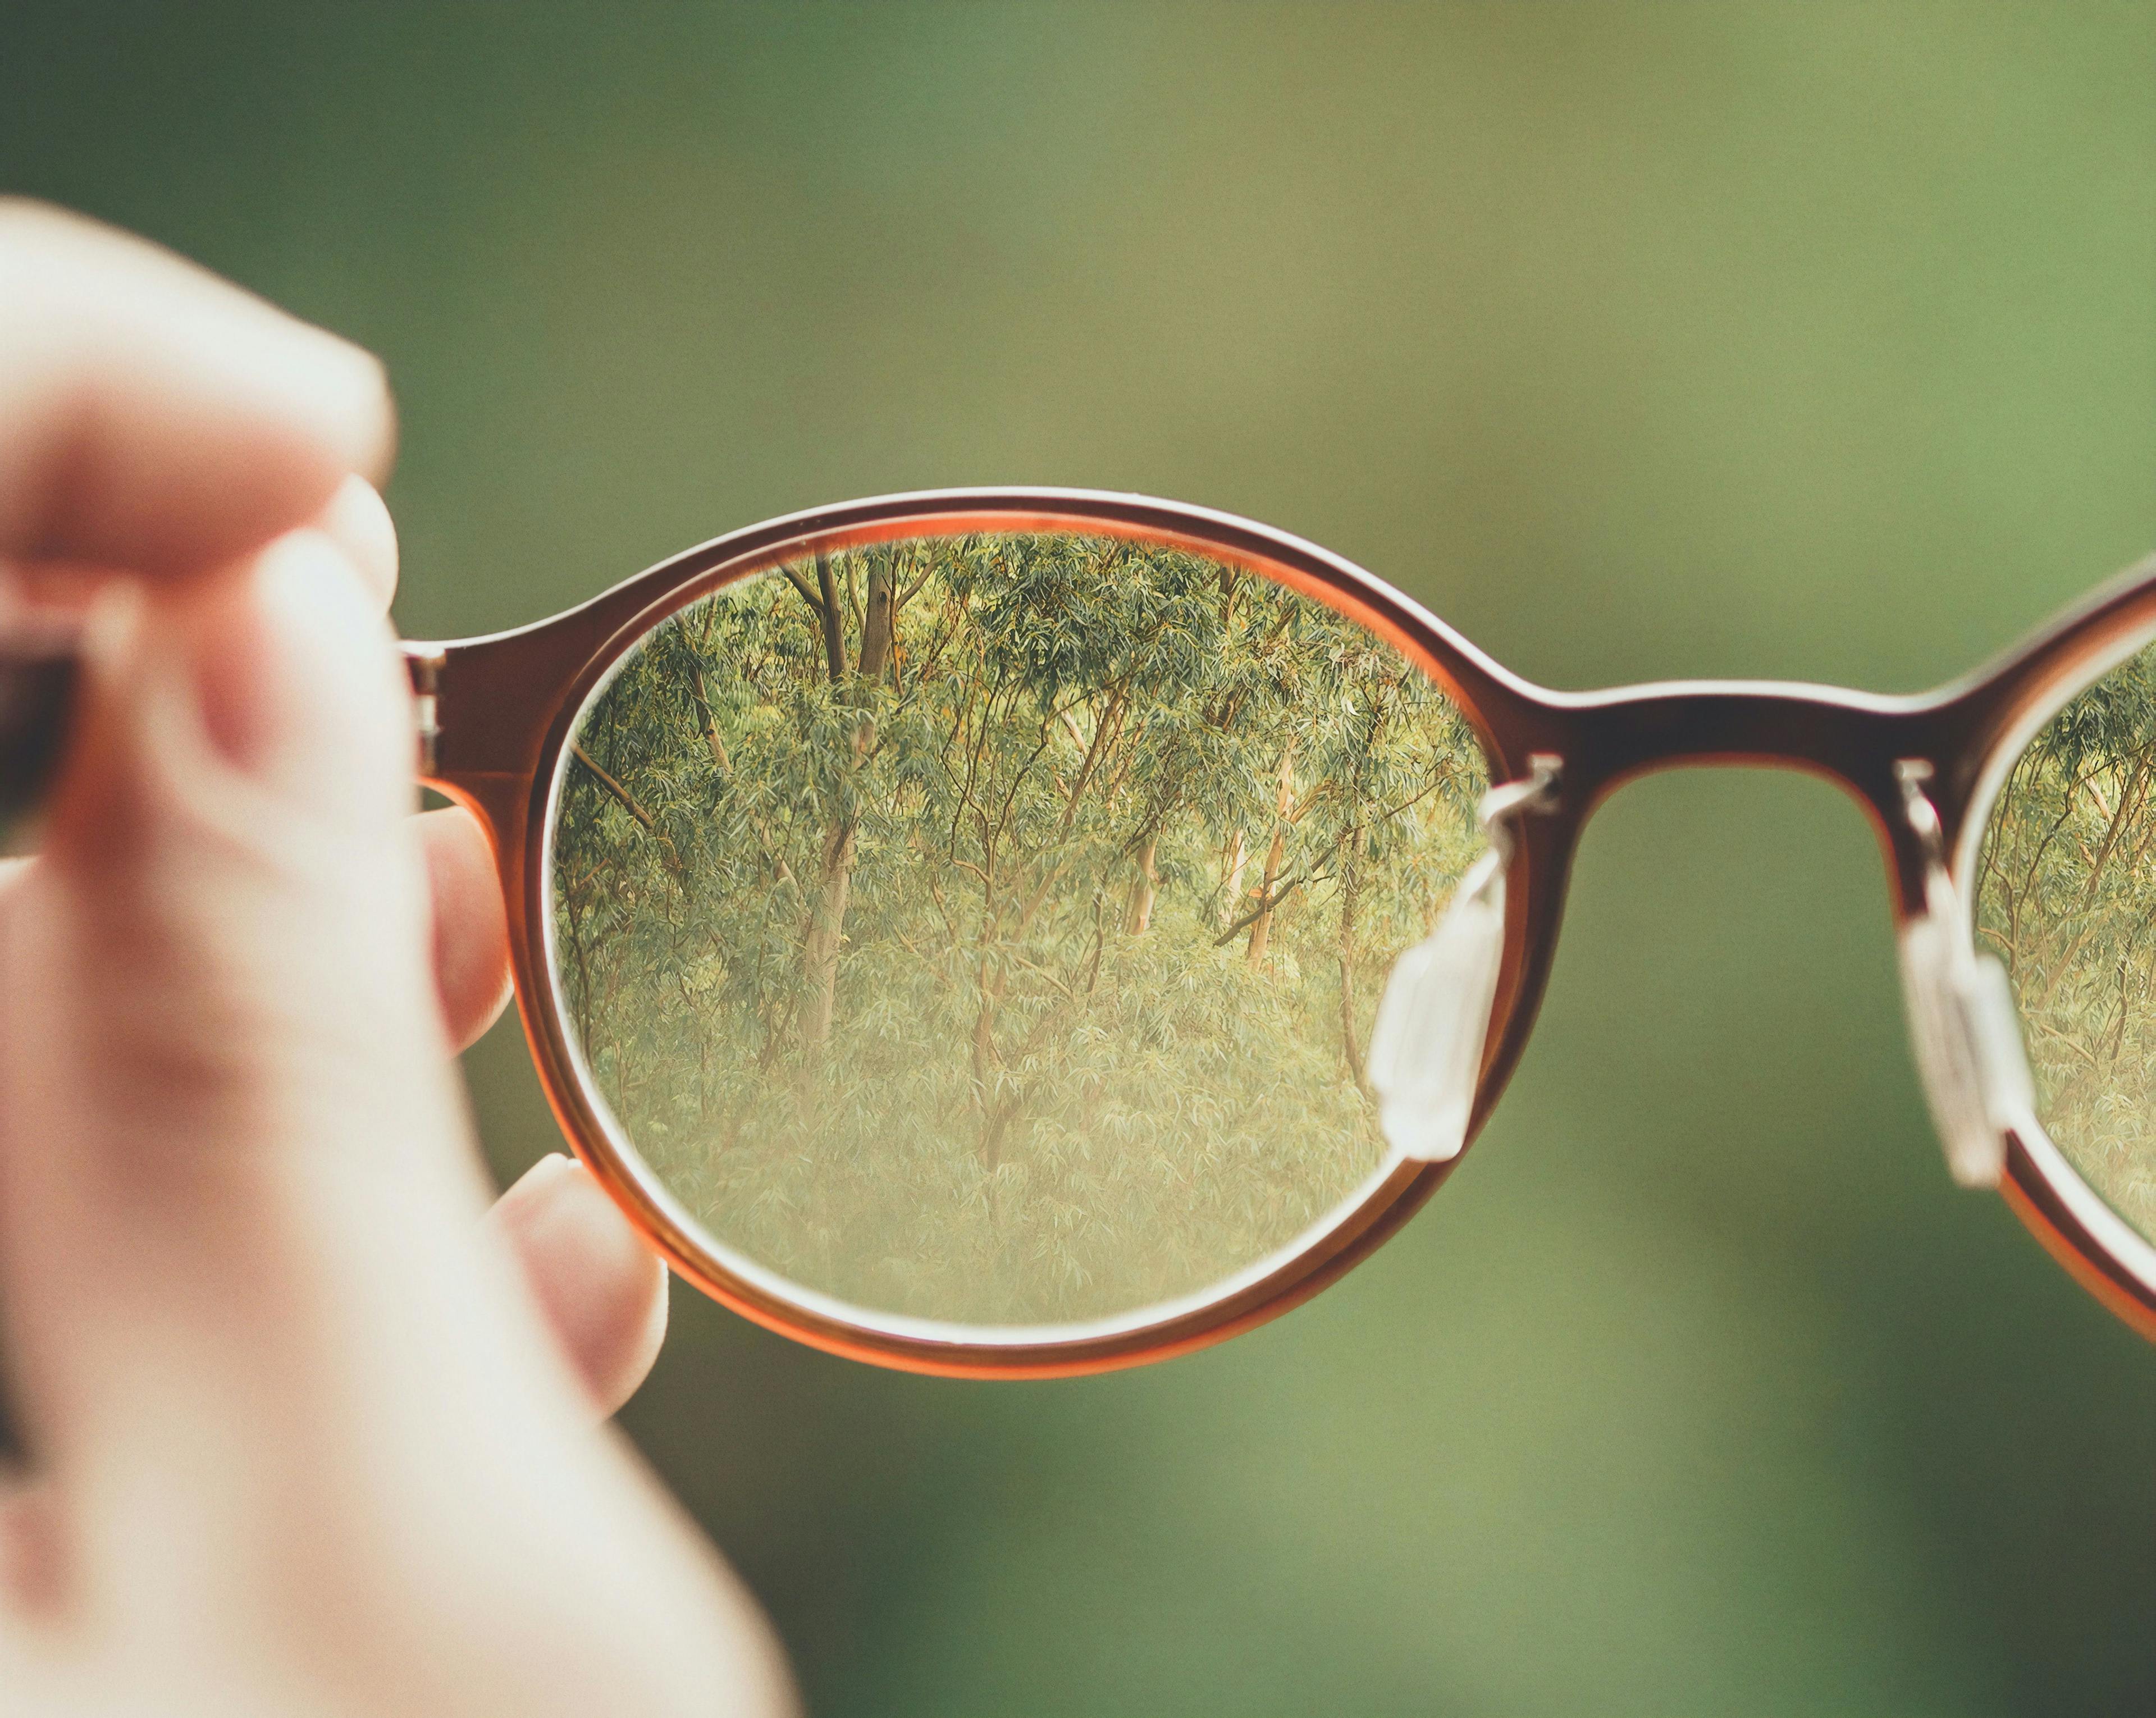 Glasses with an image of trees in focus within the frame.